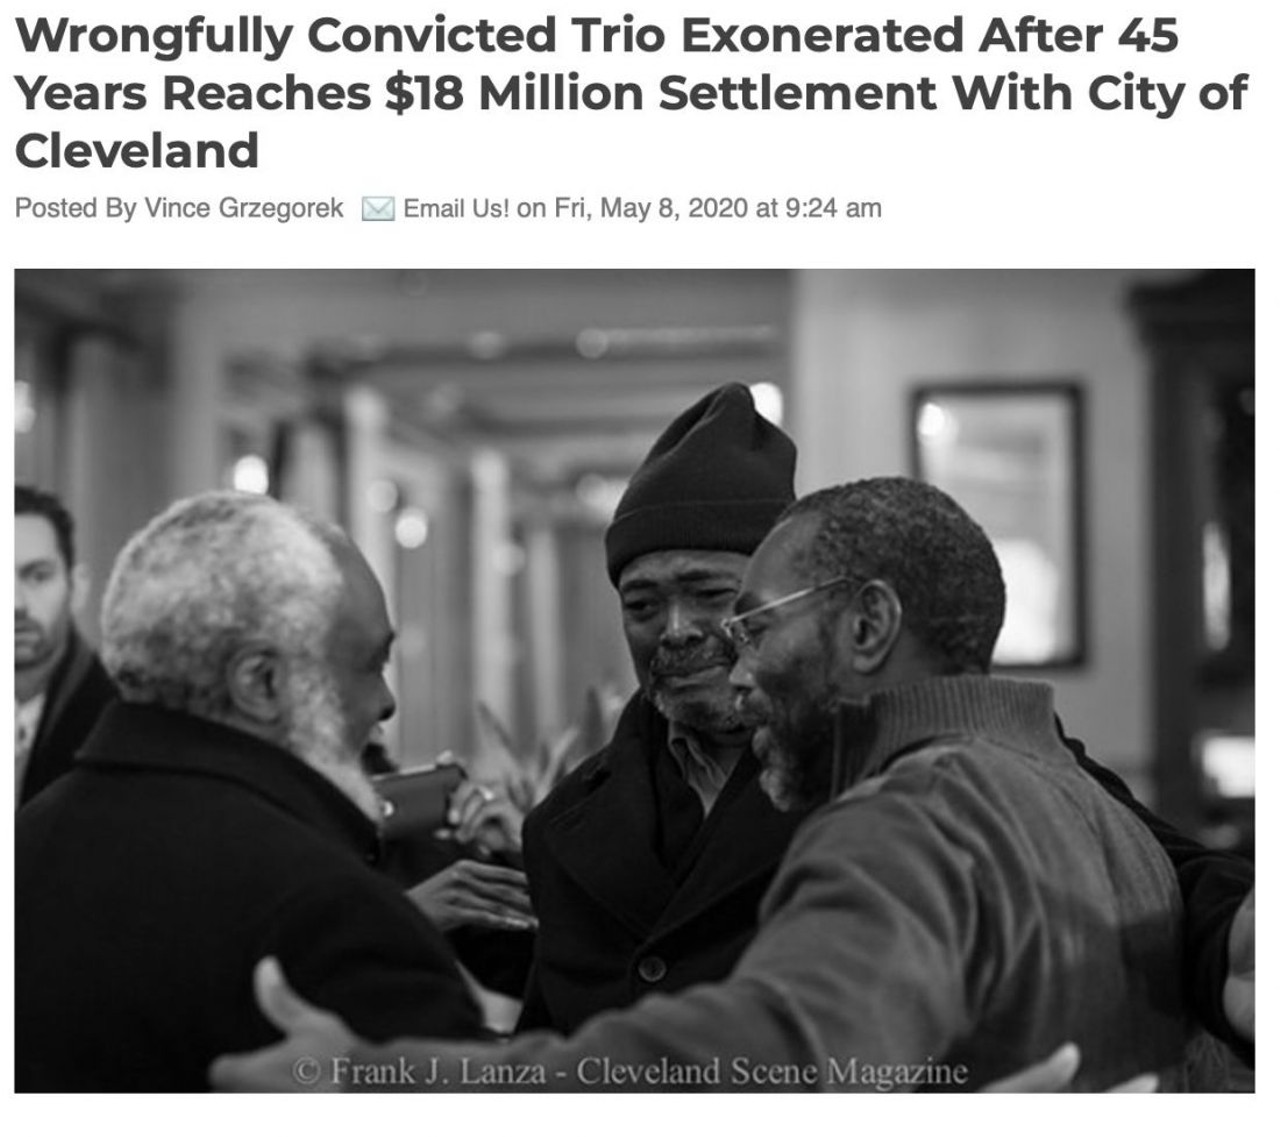  &#147;Wrongfully Convicted Trio Exonerated After 45 Years Reaches $18 Million Settlement With City of Cleveland&#148;
May 8th
&#147;&#145;For 45 years, our clients never gave up hope that someday their nightmare would be over,&#148; lawyer Terry Gilbert said in a statement. &#147;That time has come with this final resolution providing some measure of justice and closure. But the physical and emotional trauma our clients were forced to endure is an example of the deep flaws of a racist criminal legal system focused on results rather than truth and justice.&#146;&#148;
Photo by Frank J. Lanza